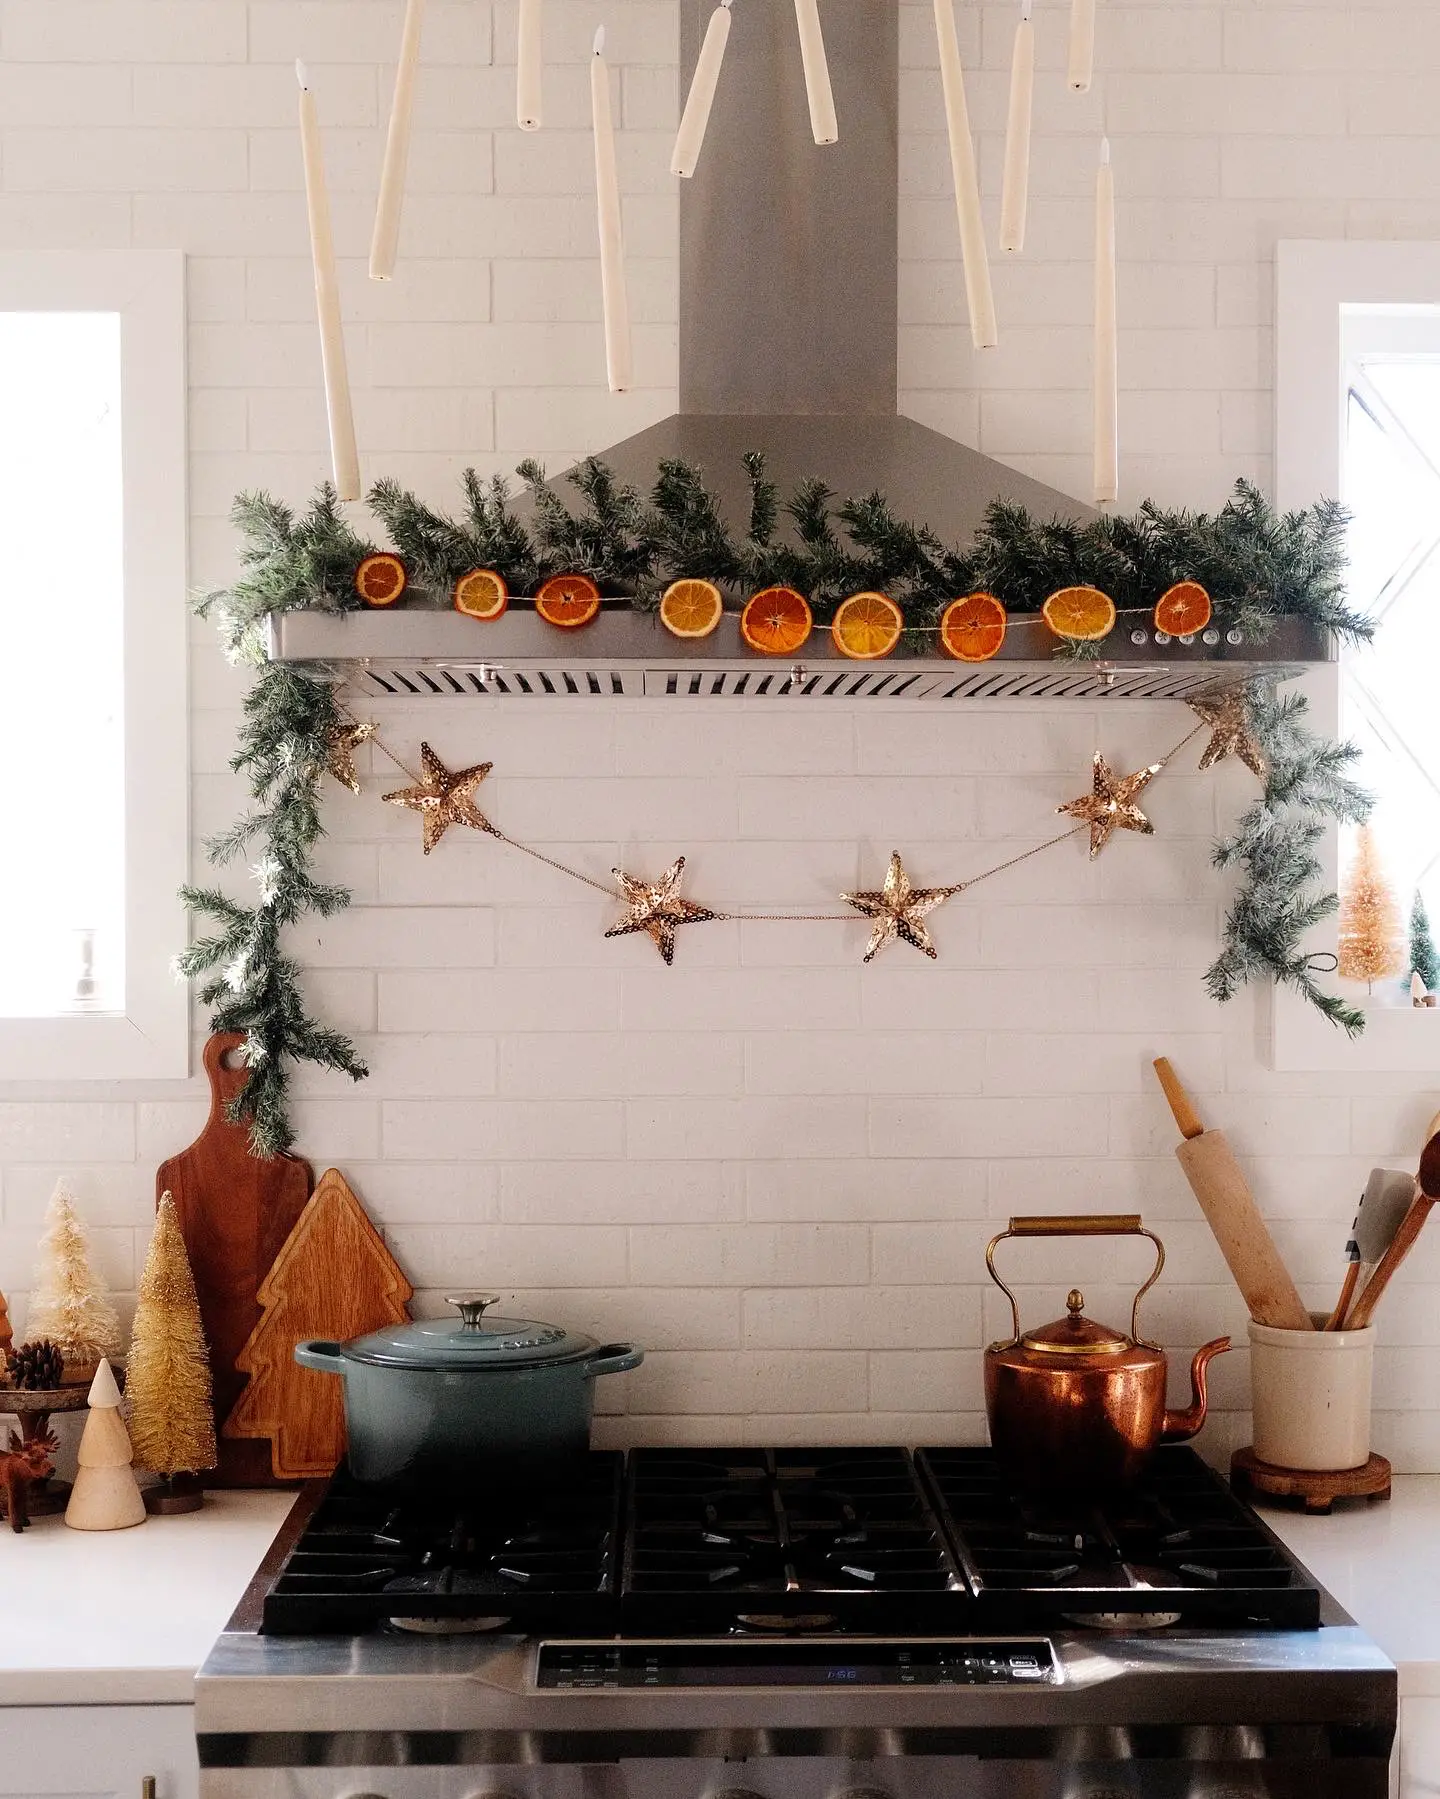 Stacey's Nostalgic Vintage Christmas Cottage Is Here to Inspire Your  Holiday Decor — Bindle & Brass Trading Company